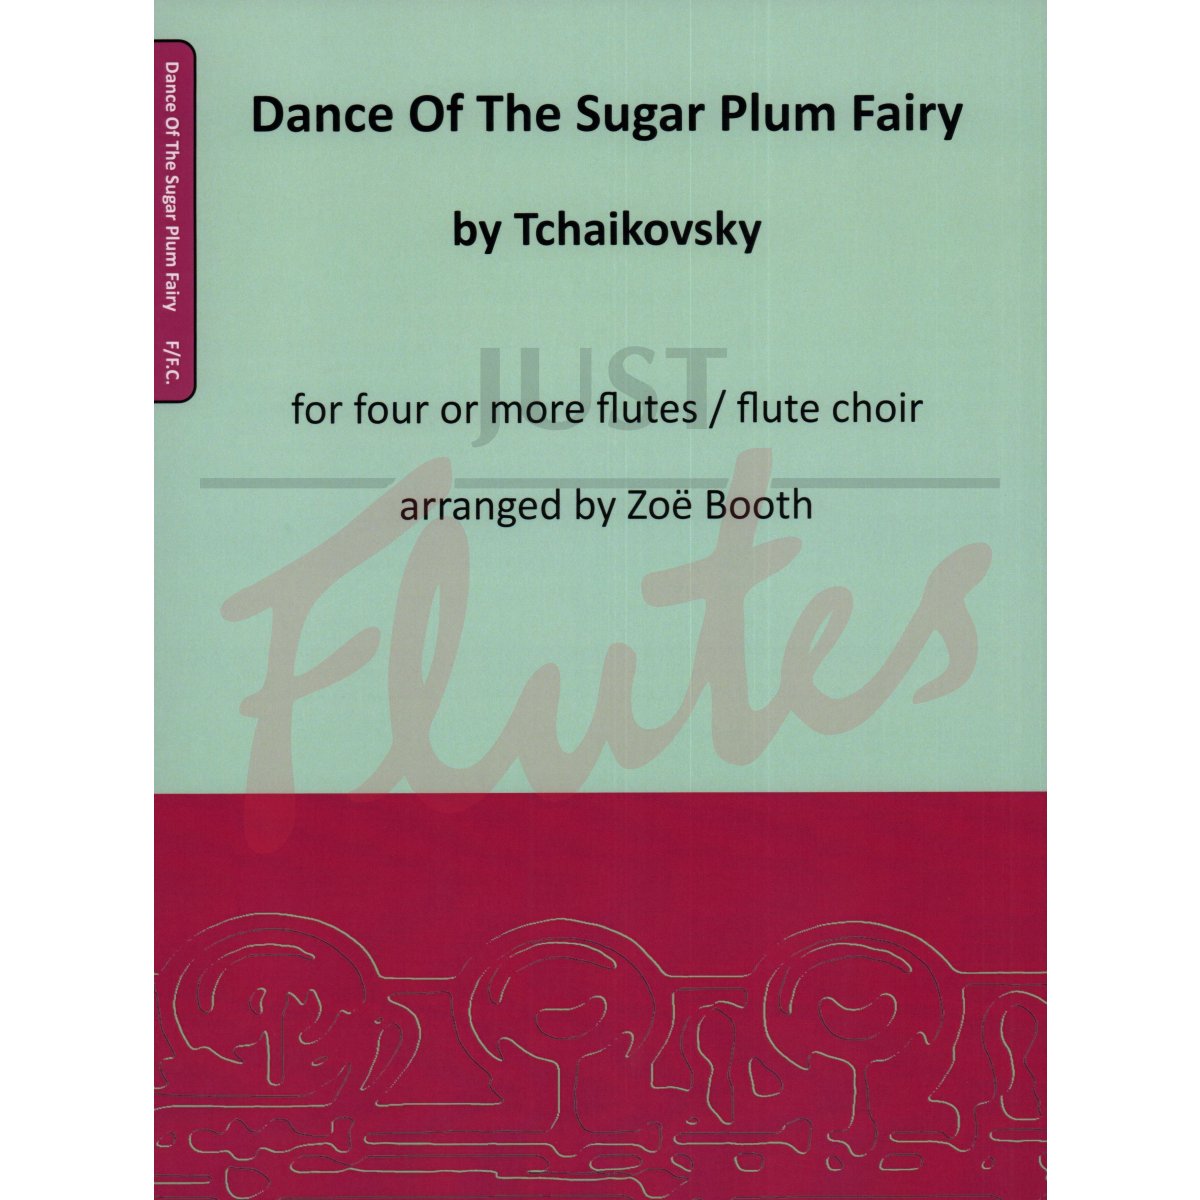 Dance of the Sugar-Plum Fairy for Four or more Flutes